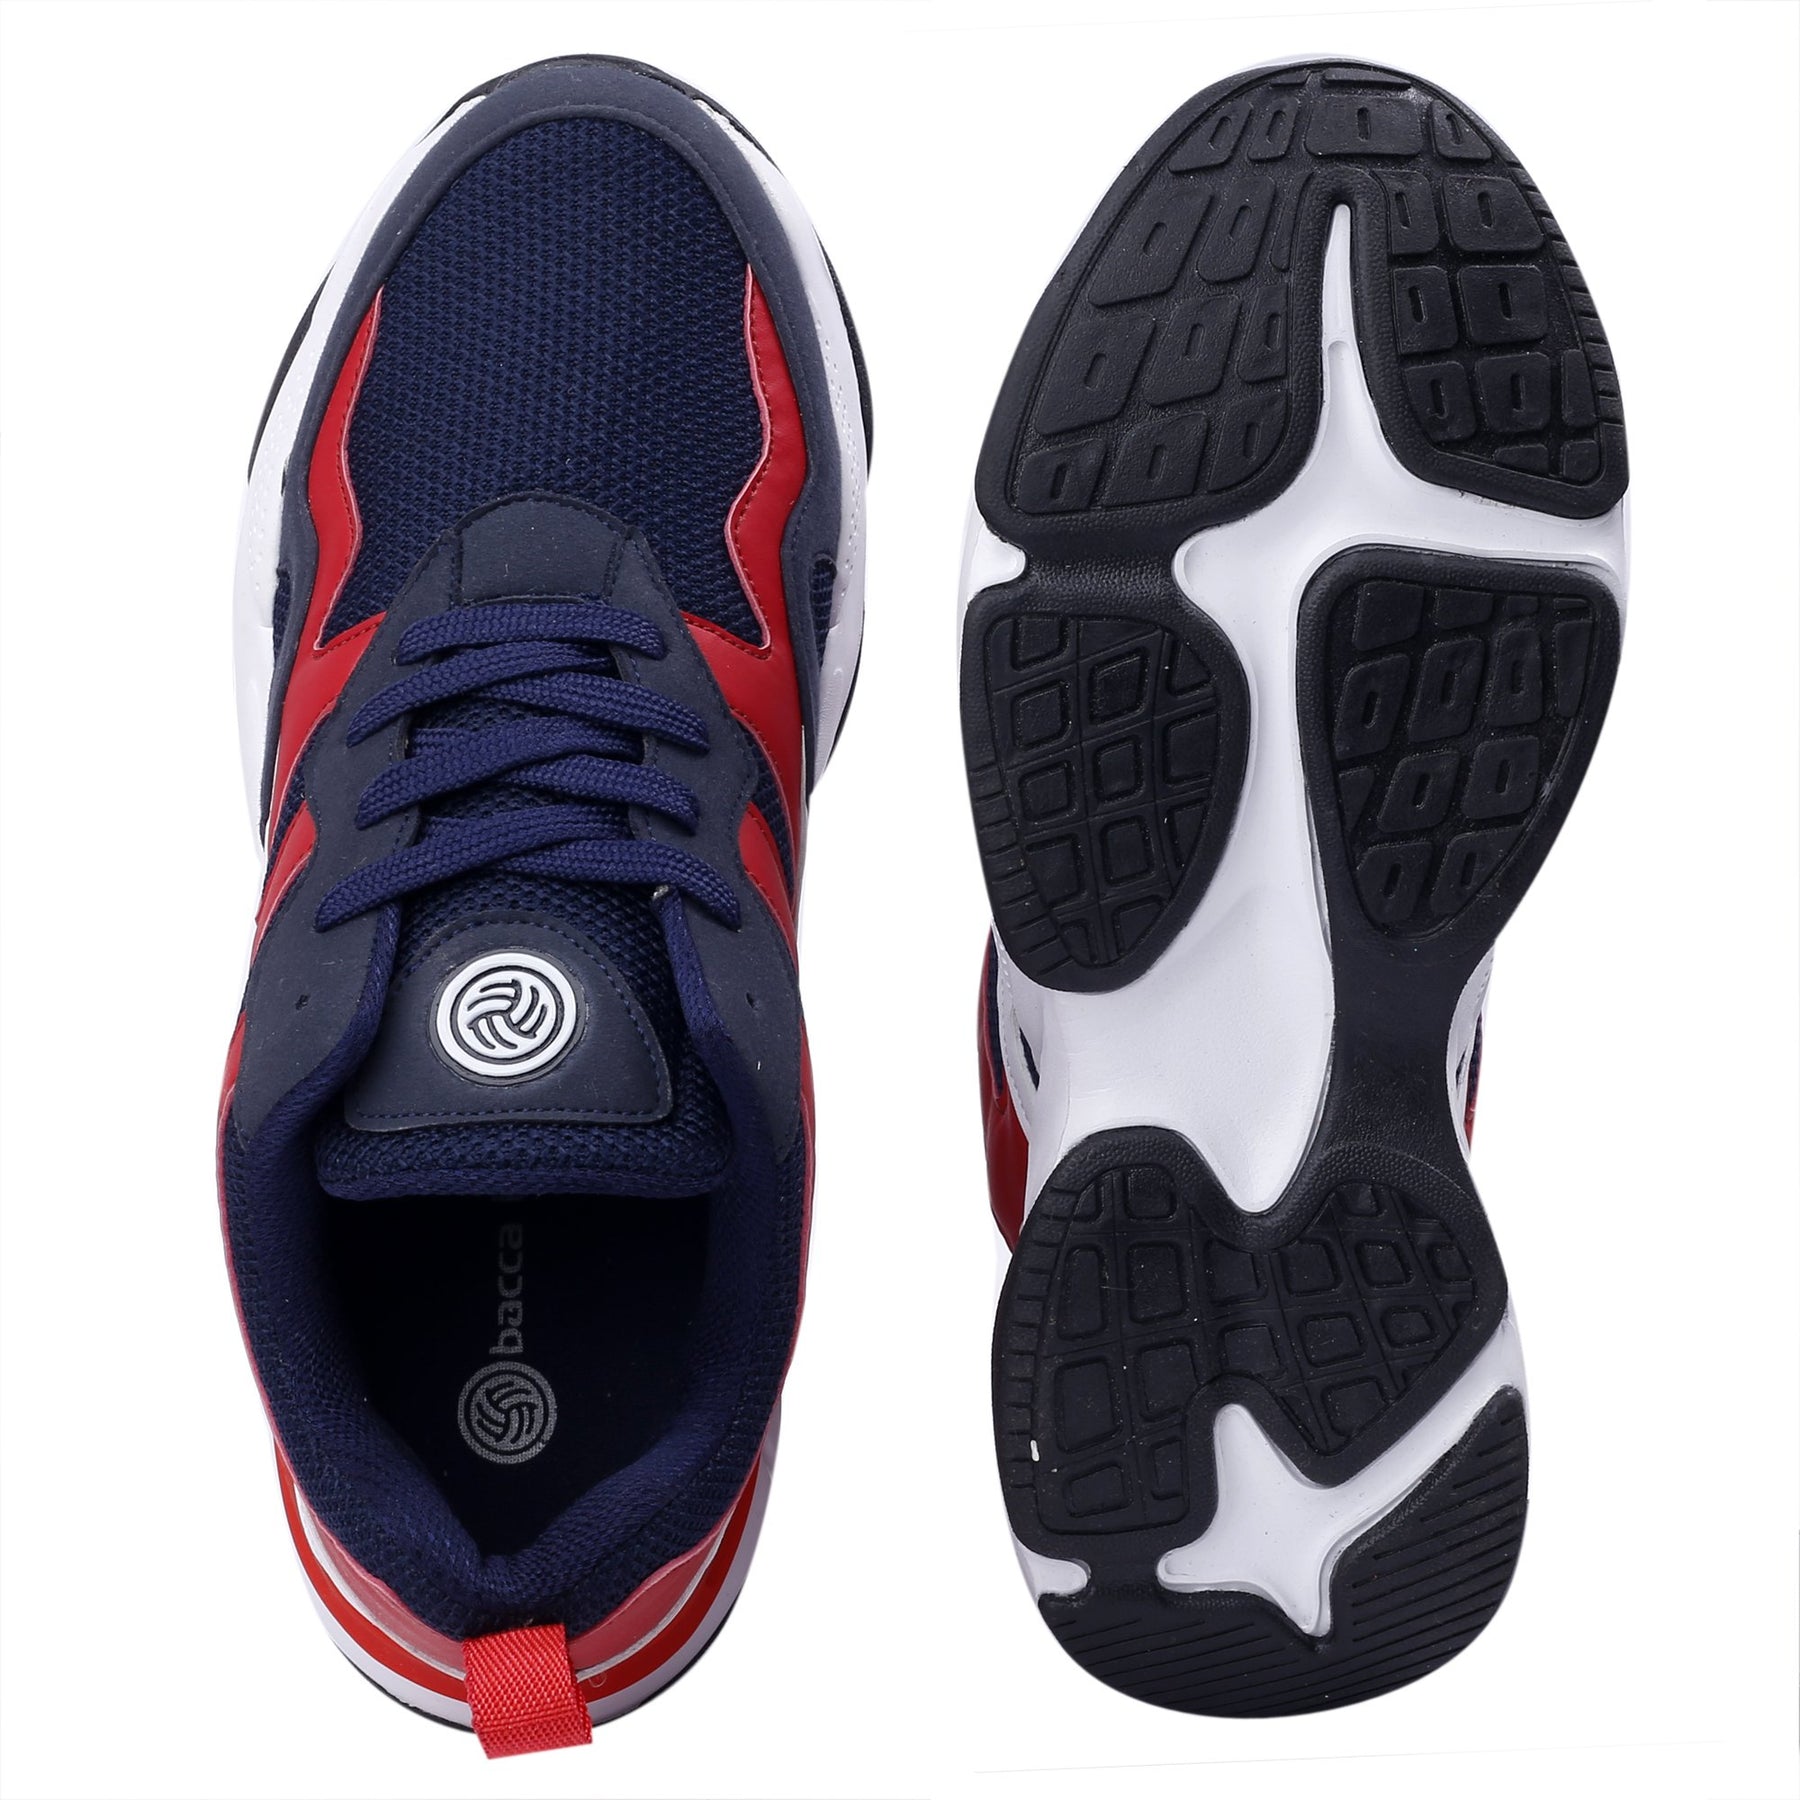 running shoes, best running shoes, sports shoes, white running shoes, gym shoes